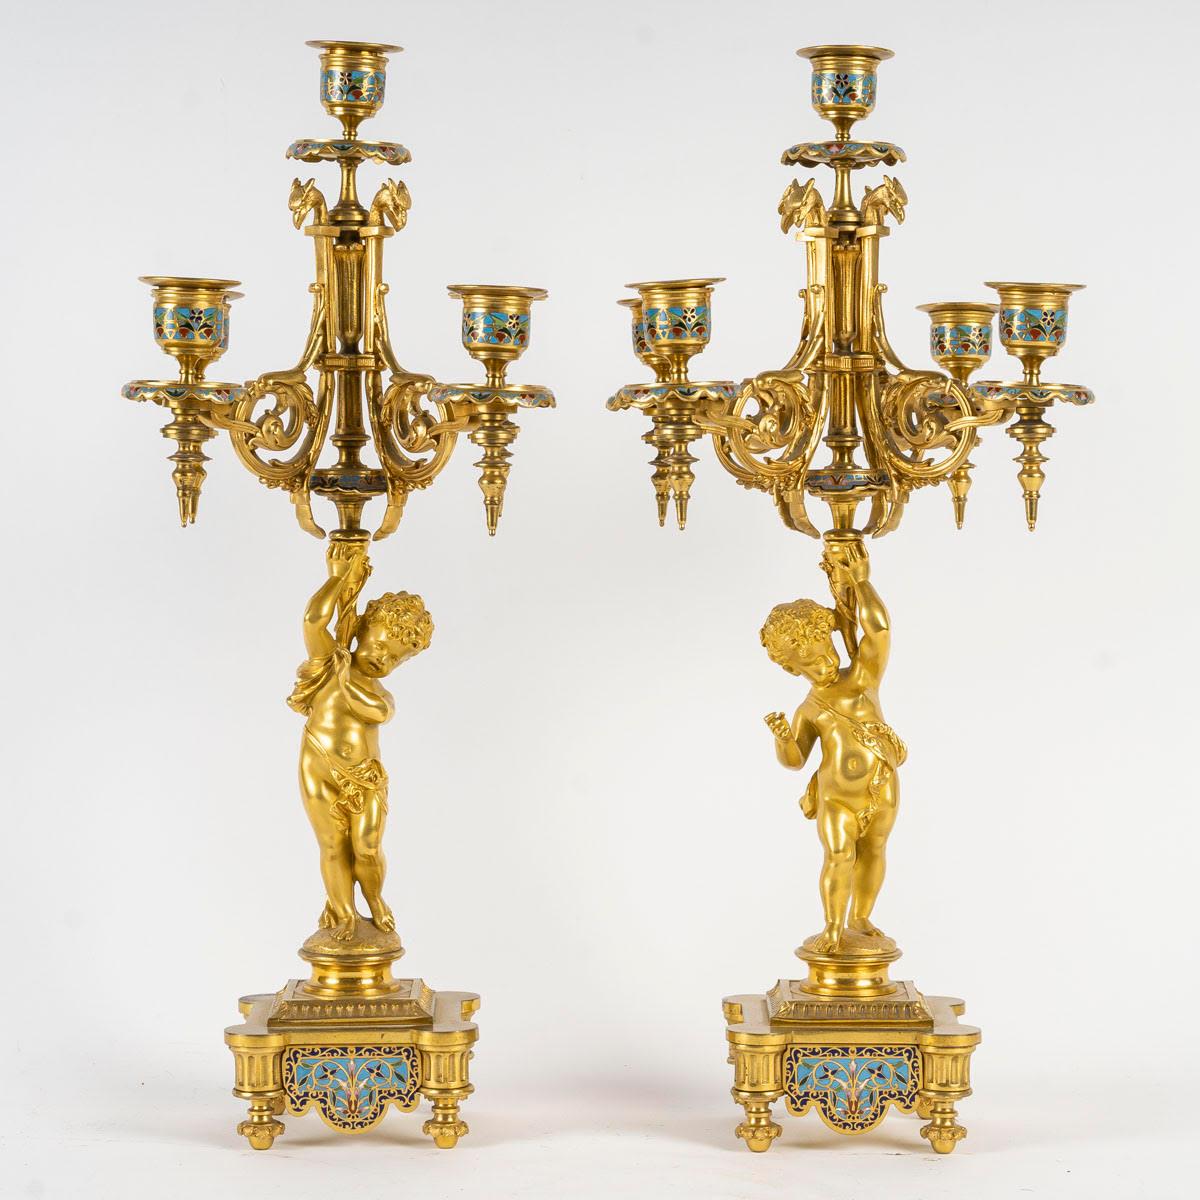 Mantelpiece and candelabras in gilt and cloisonné bronze, 19th century, Napoleon III period.

Clock, mantelpiece and candelabra in gilt and cloisonné bronze, beautiful gilding and chasing of the bronze, 19th century, Napoleon III period, clock